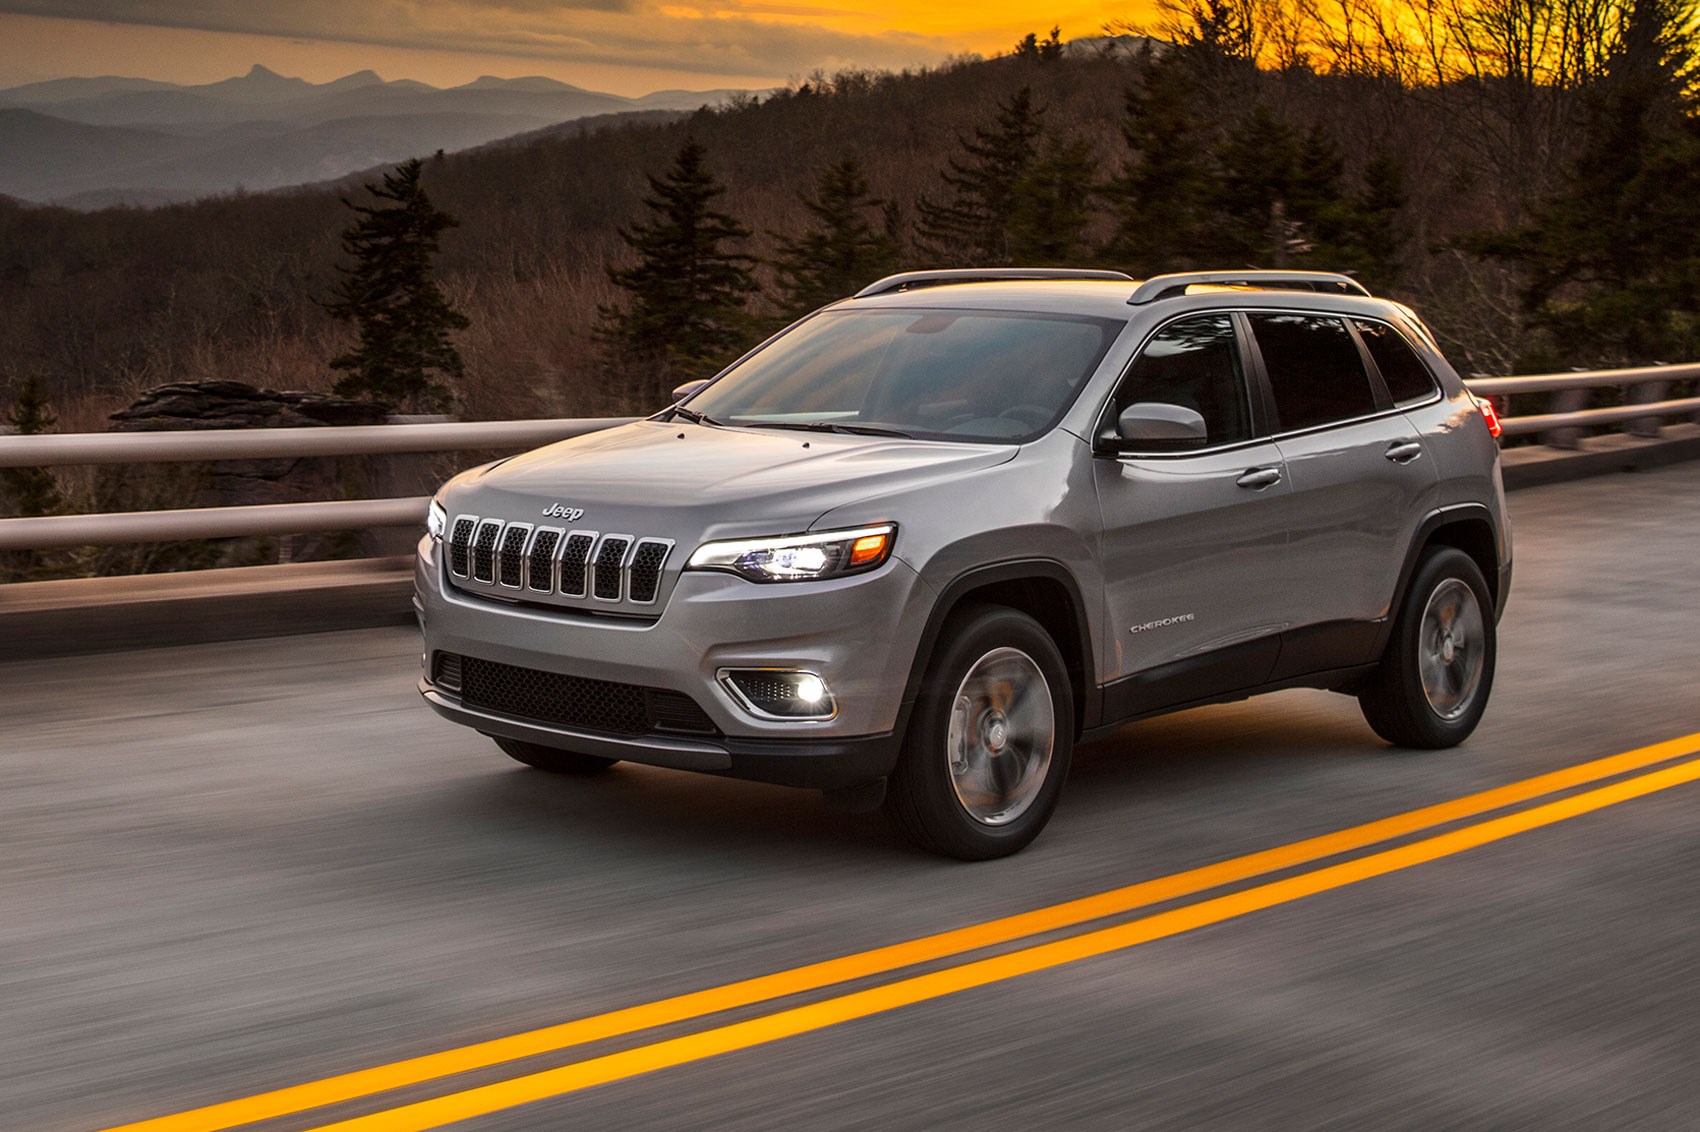 grey Jeep Compass driving on a mountain road